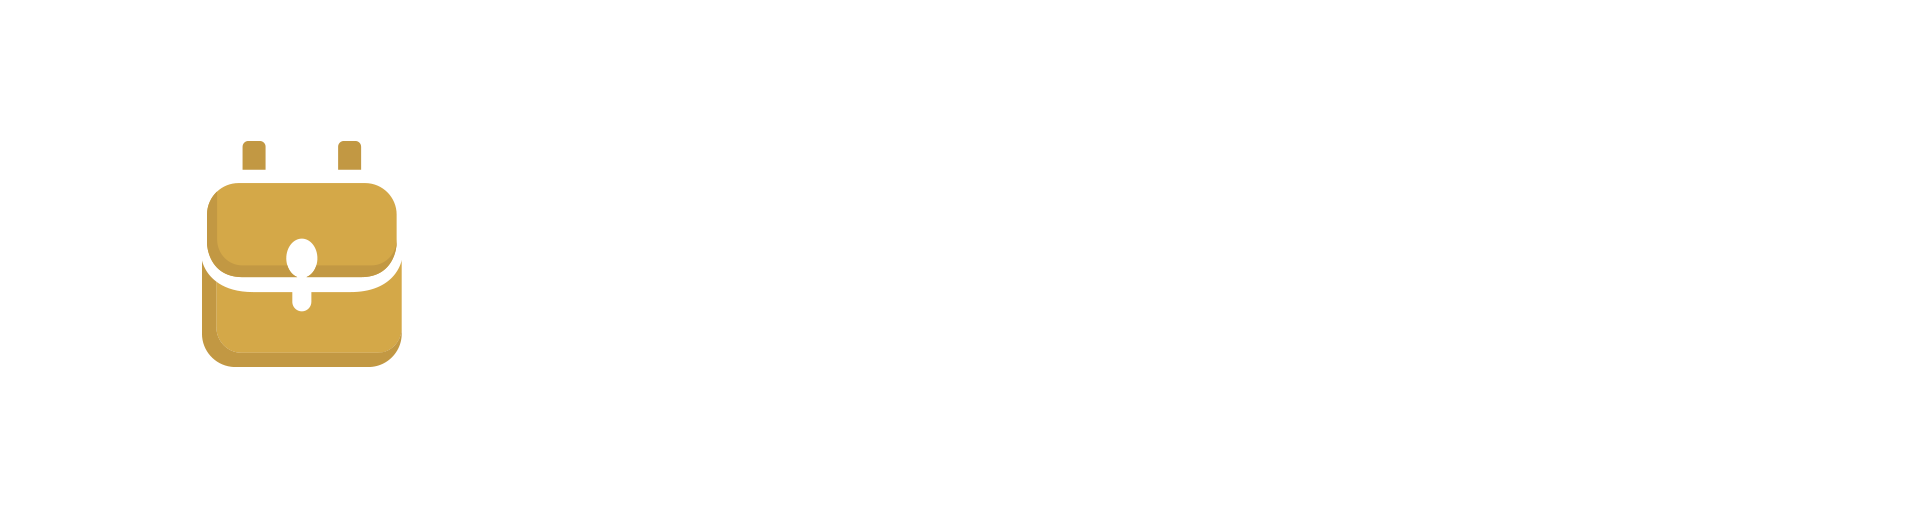 Your Private Europe